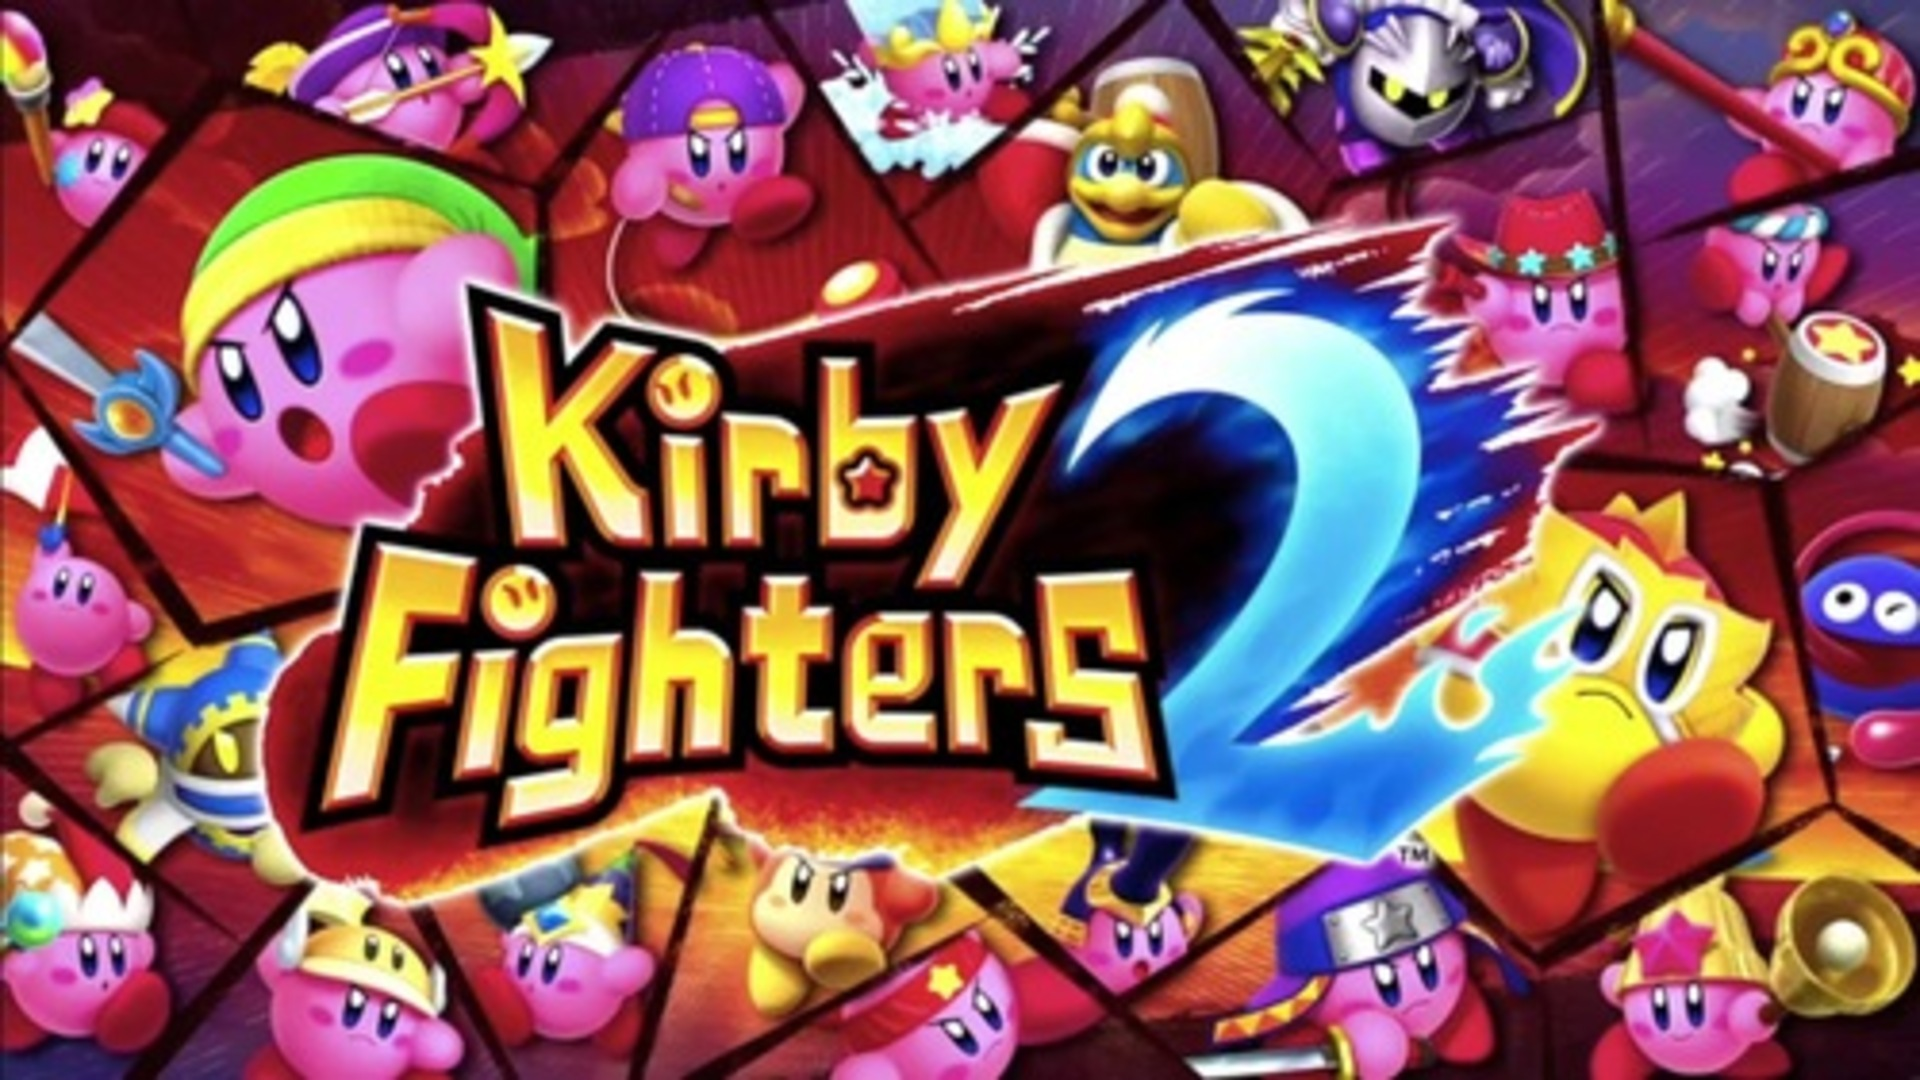 Kirby Fighters 2 Logo